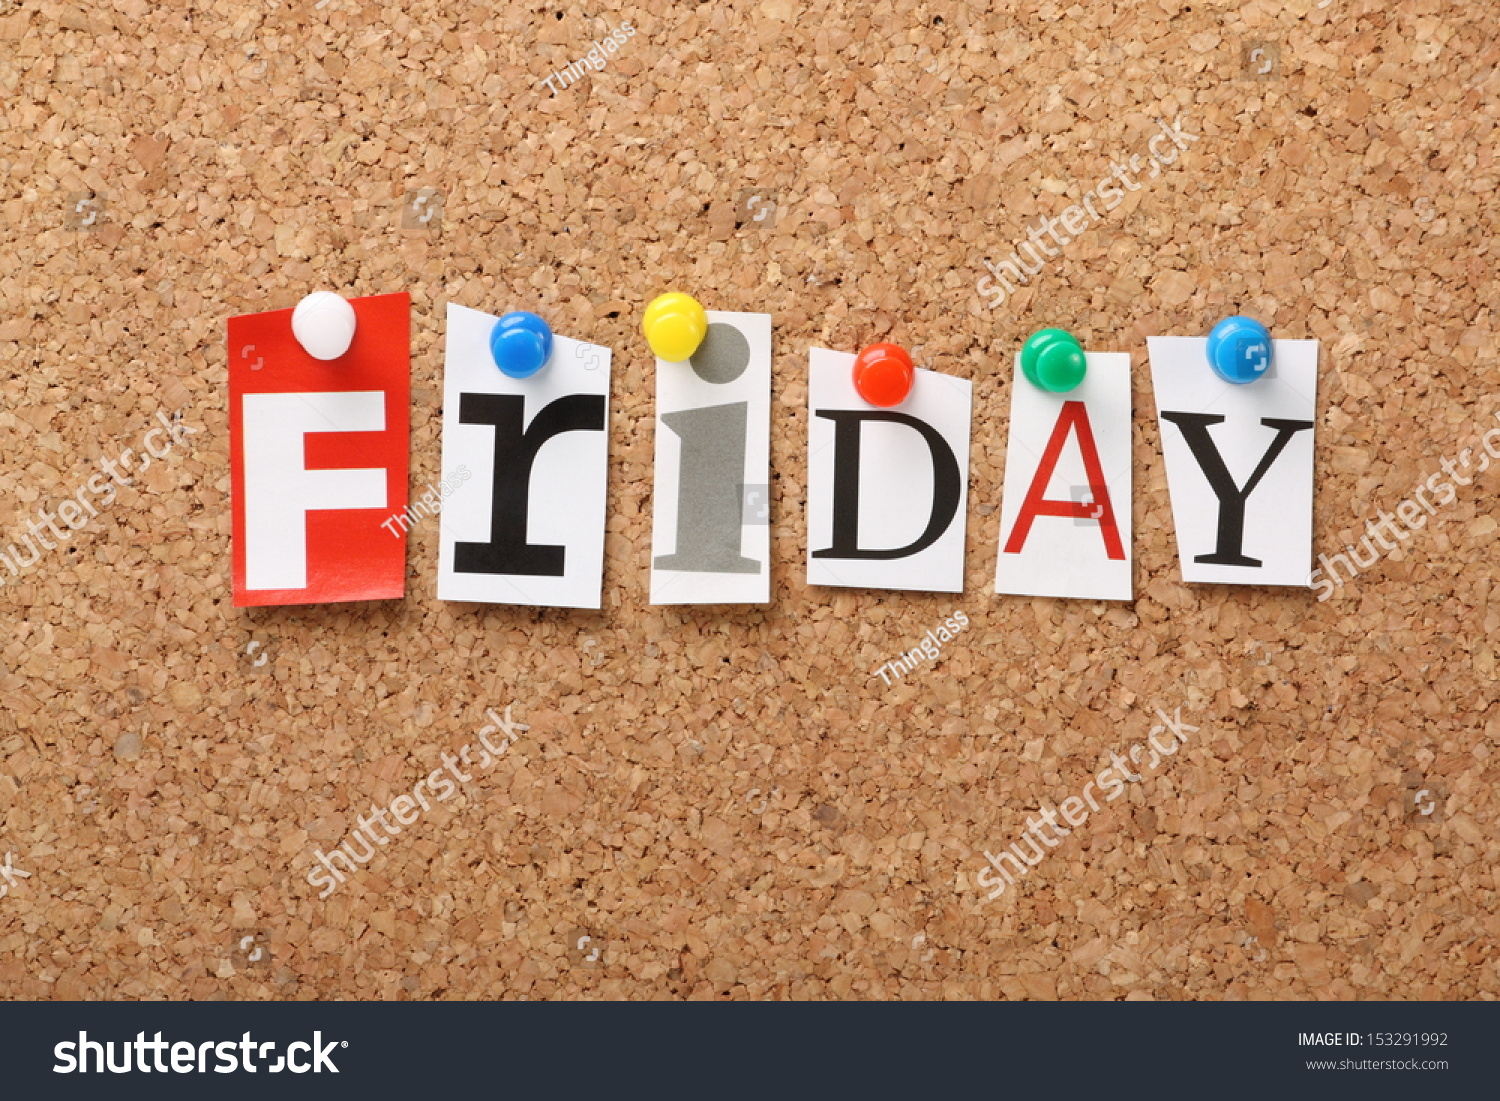 Word Friday Cut Out Magazine Letters Stock Photo 153291992 - Shutterstock